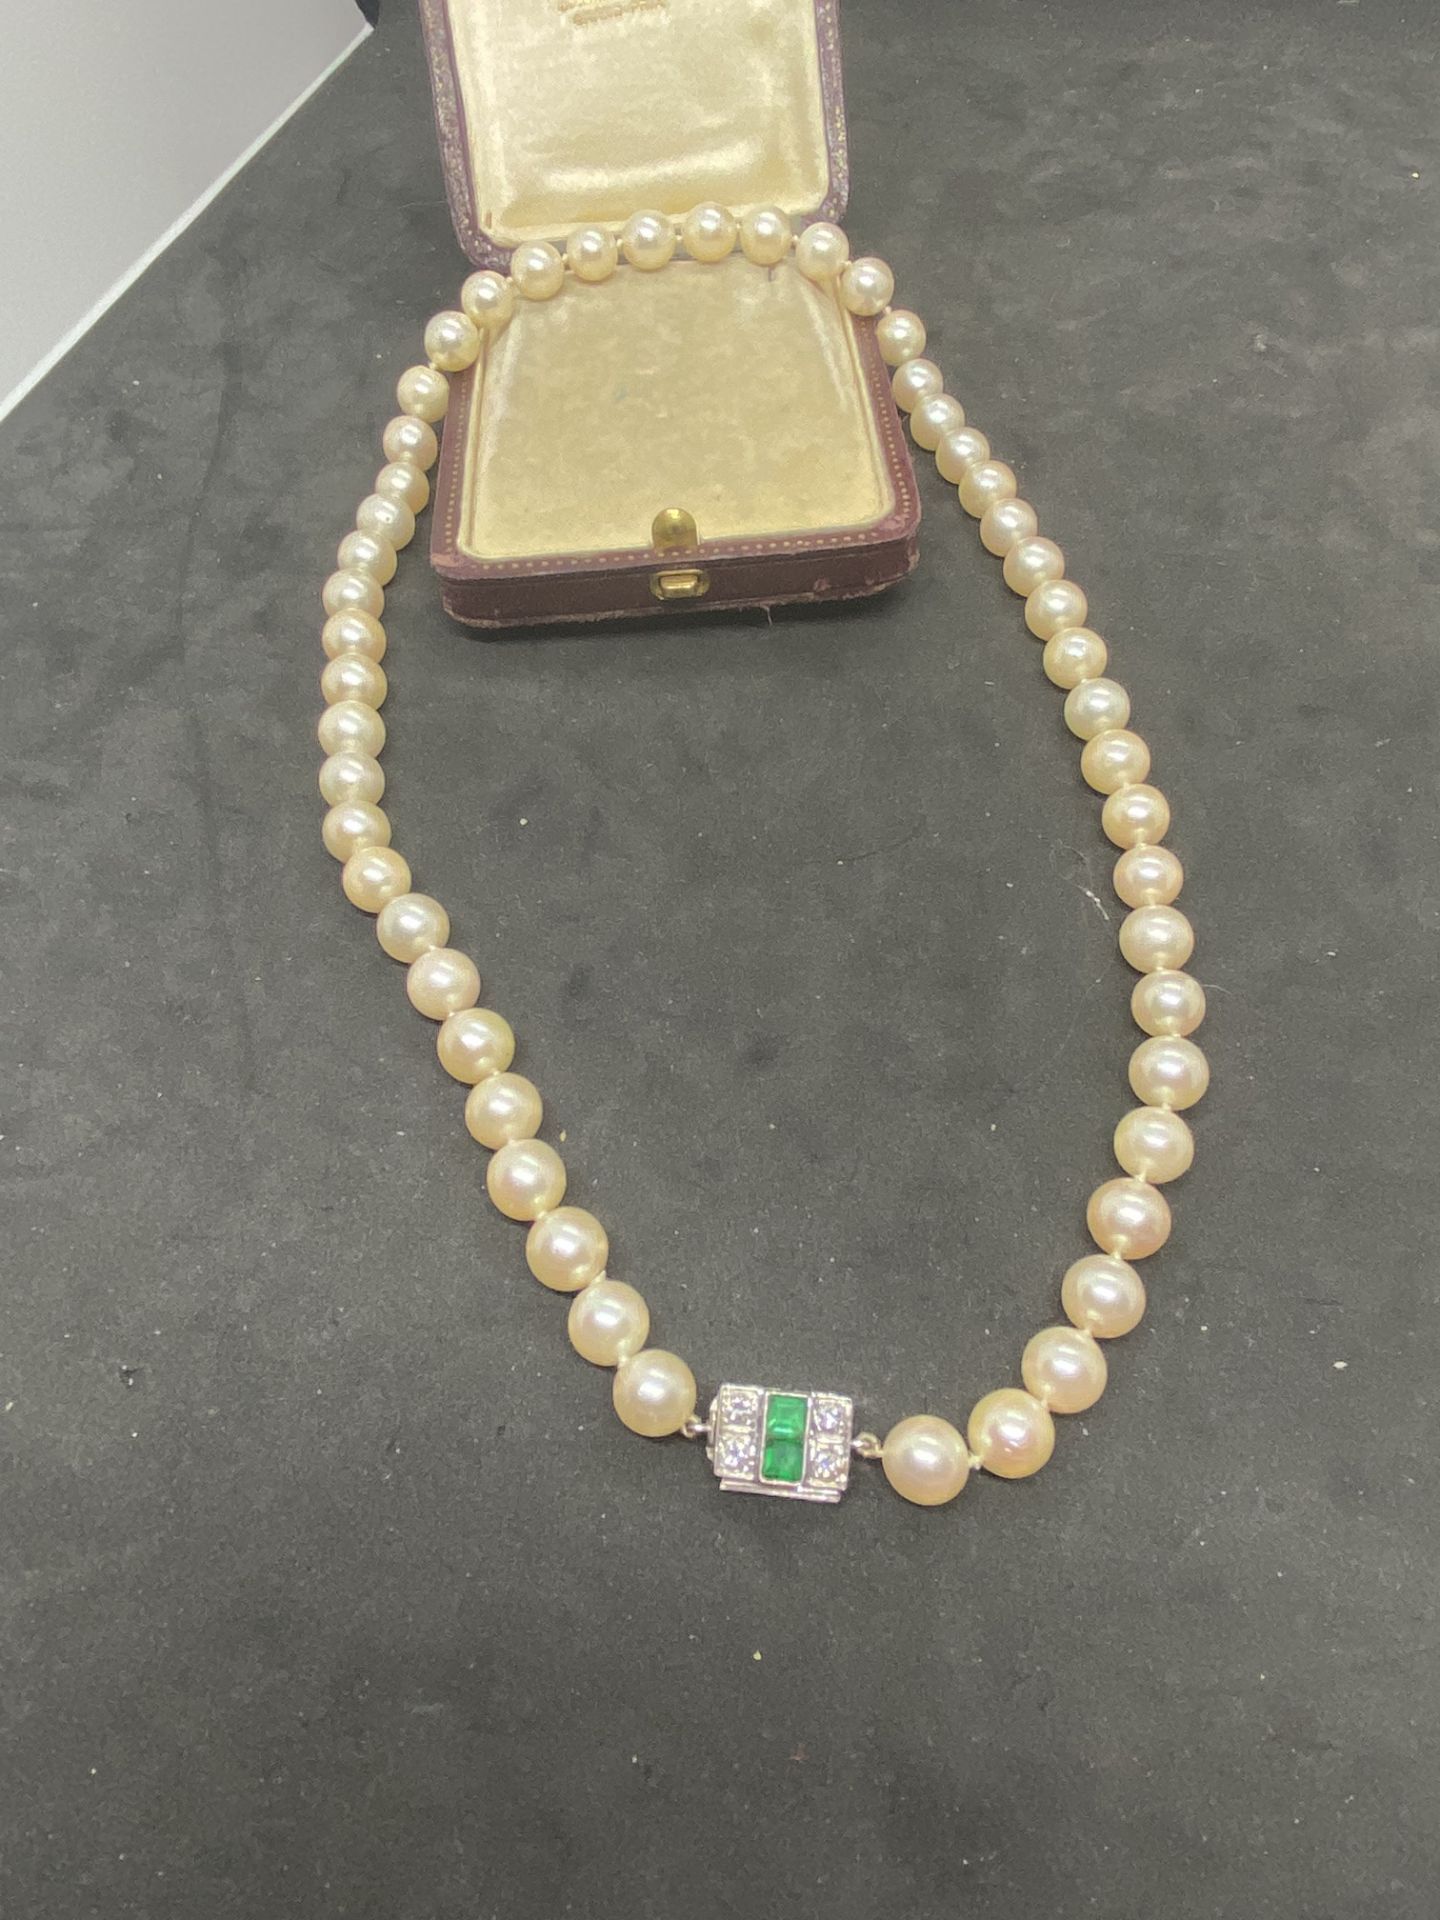 VINTAGE CULTURED PEARL NECKLACE - WHITE METAL CLASP SET WITH EMERALDS & DIAMONDS (TESTED WHITE GOLD) - Image 2 of 8